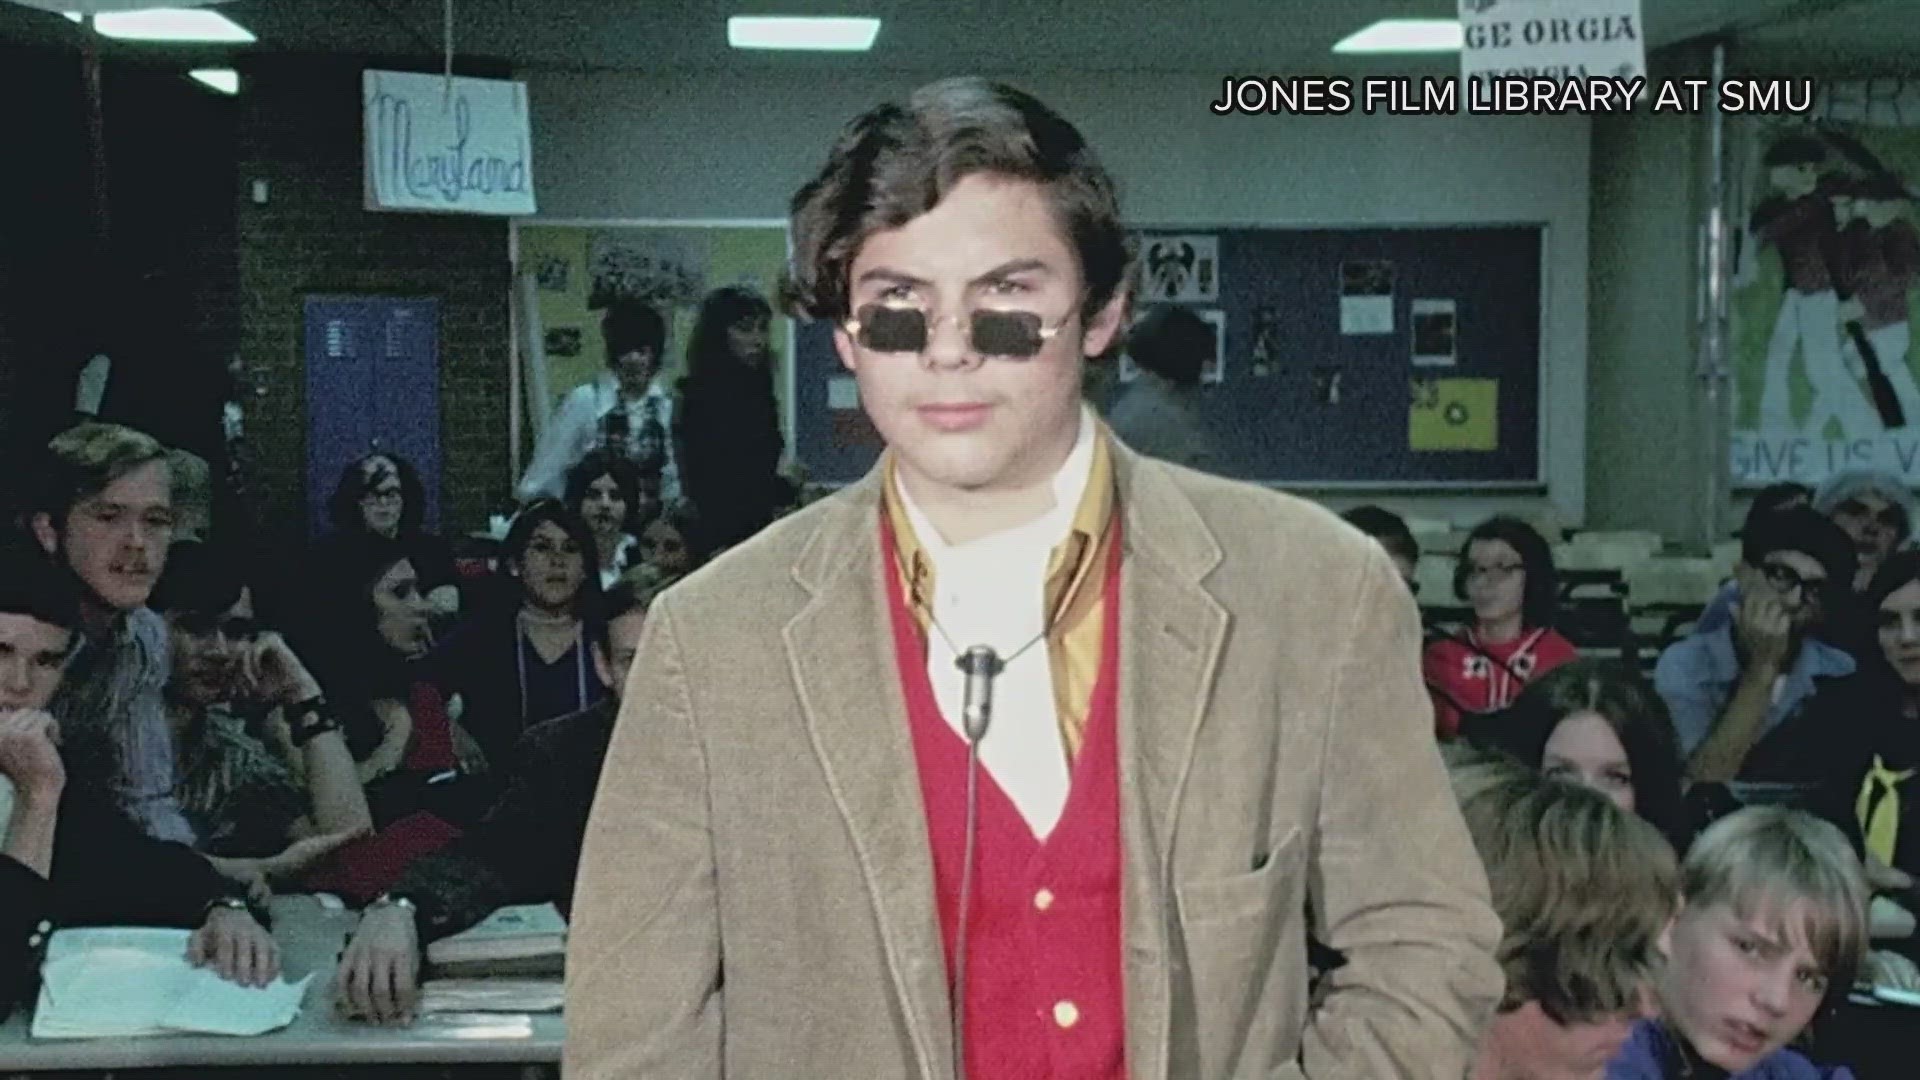 Chris Sadeghi picked a few clips of old WFAA reports on North Texas schools.